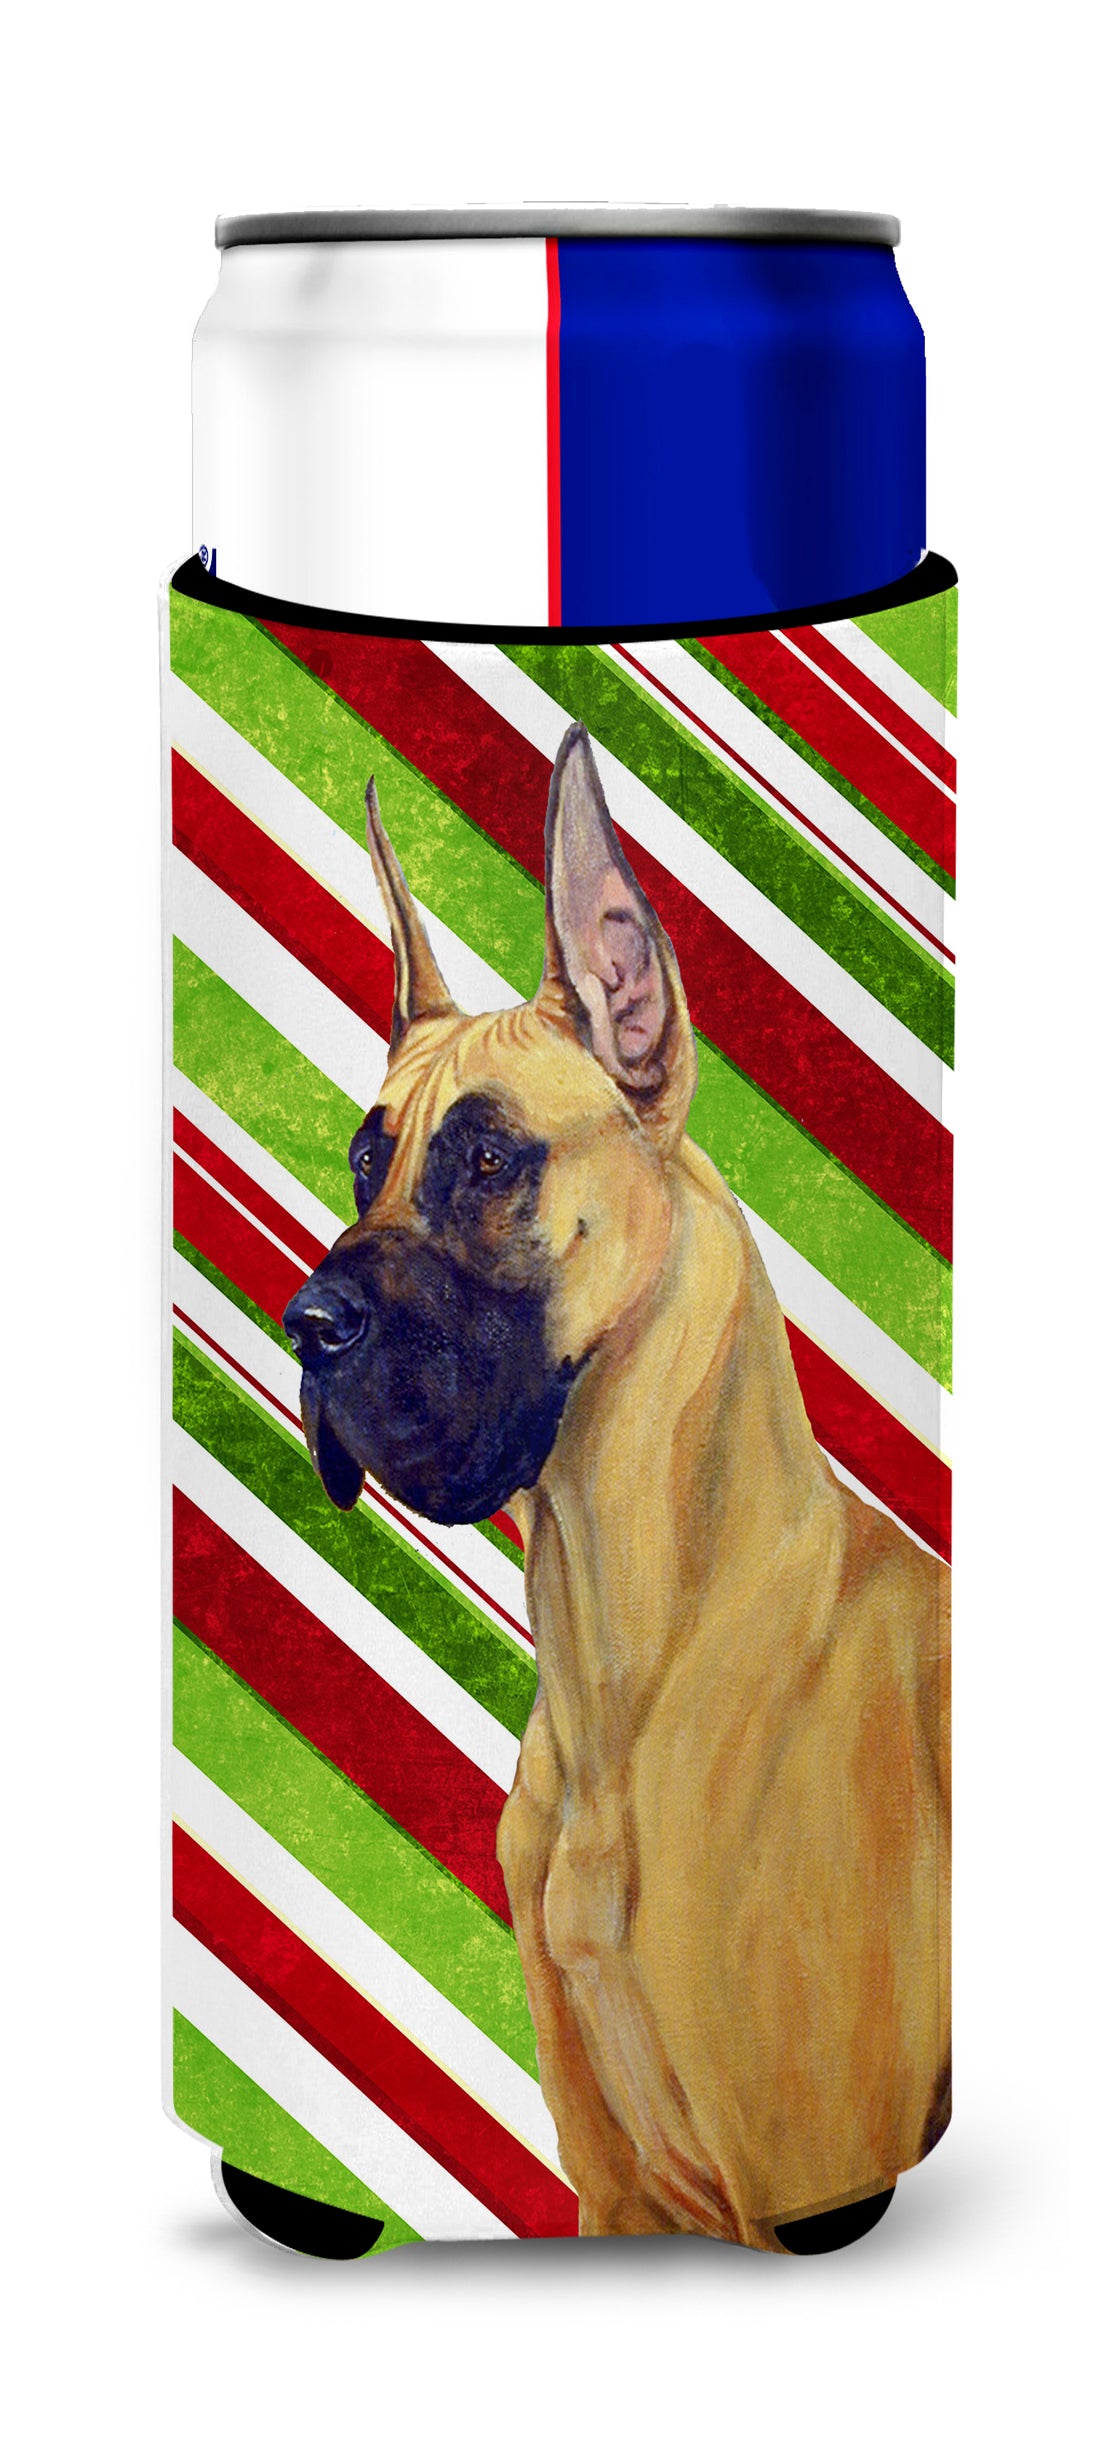 Great Dane Candy Cane Holiday Christmas Ultra Beverage Insulators for slim cans LH9220MUK.